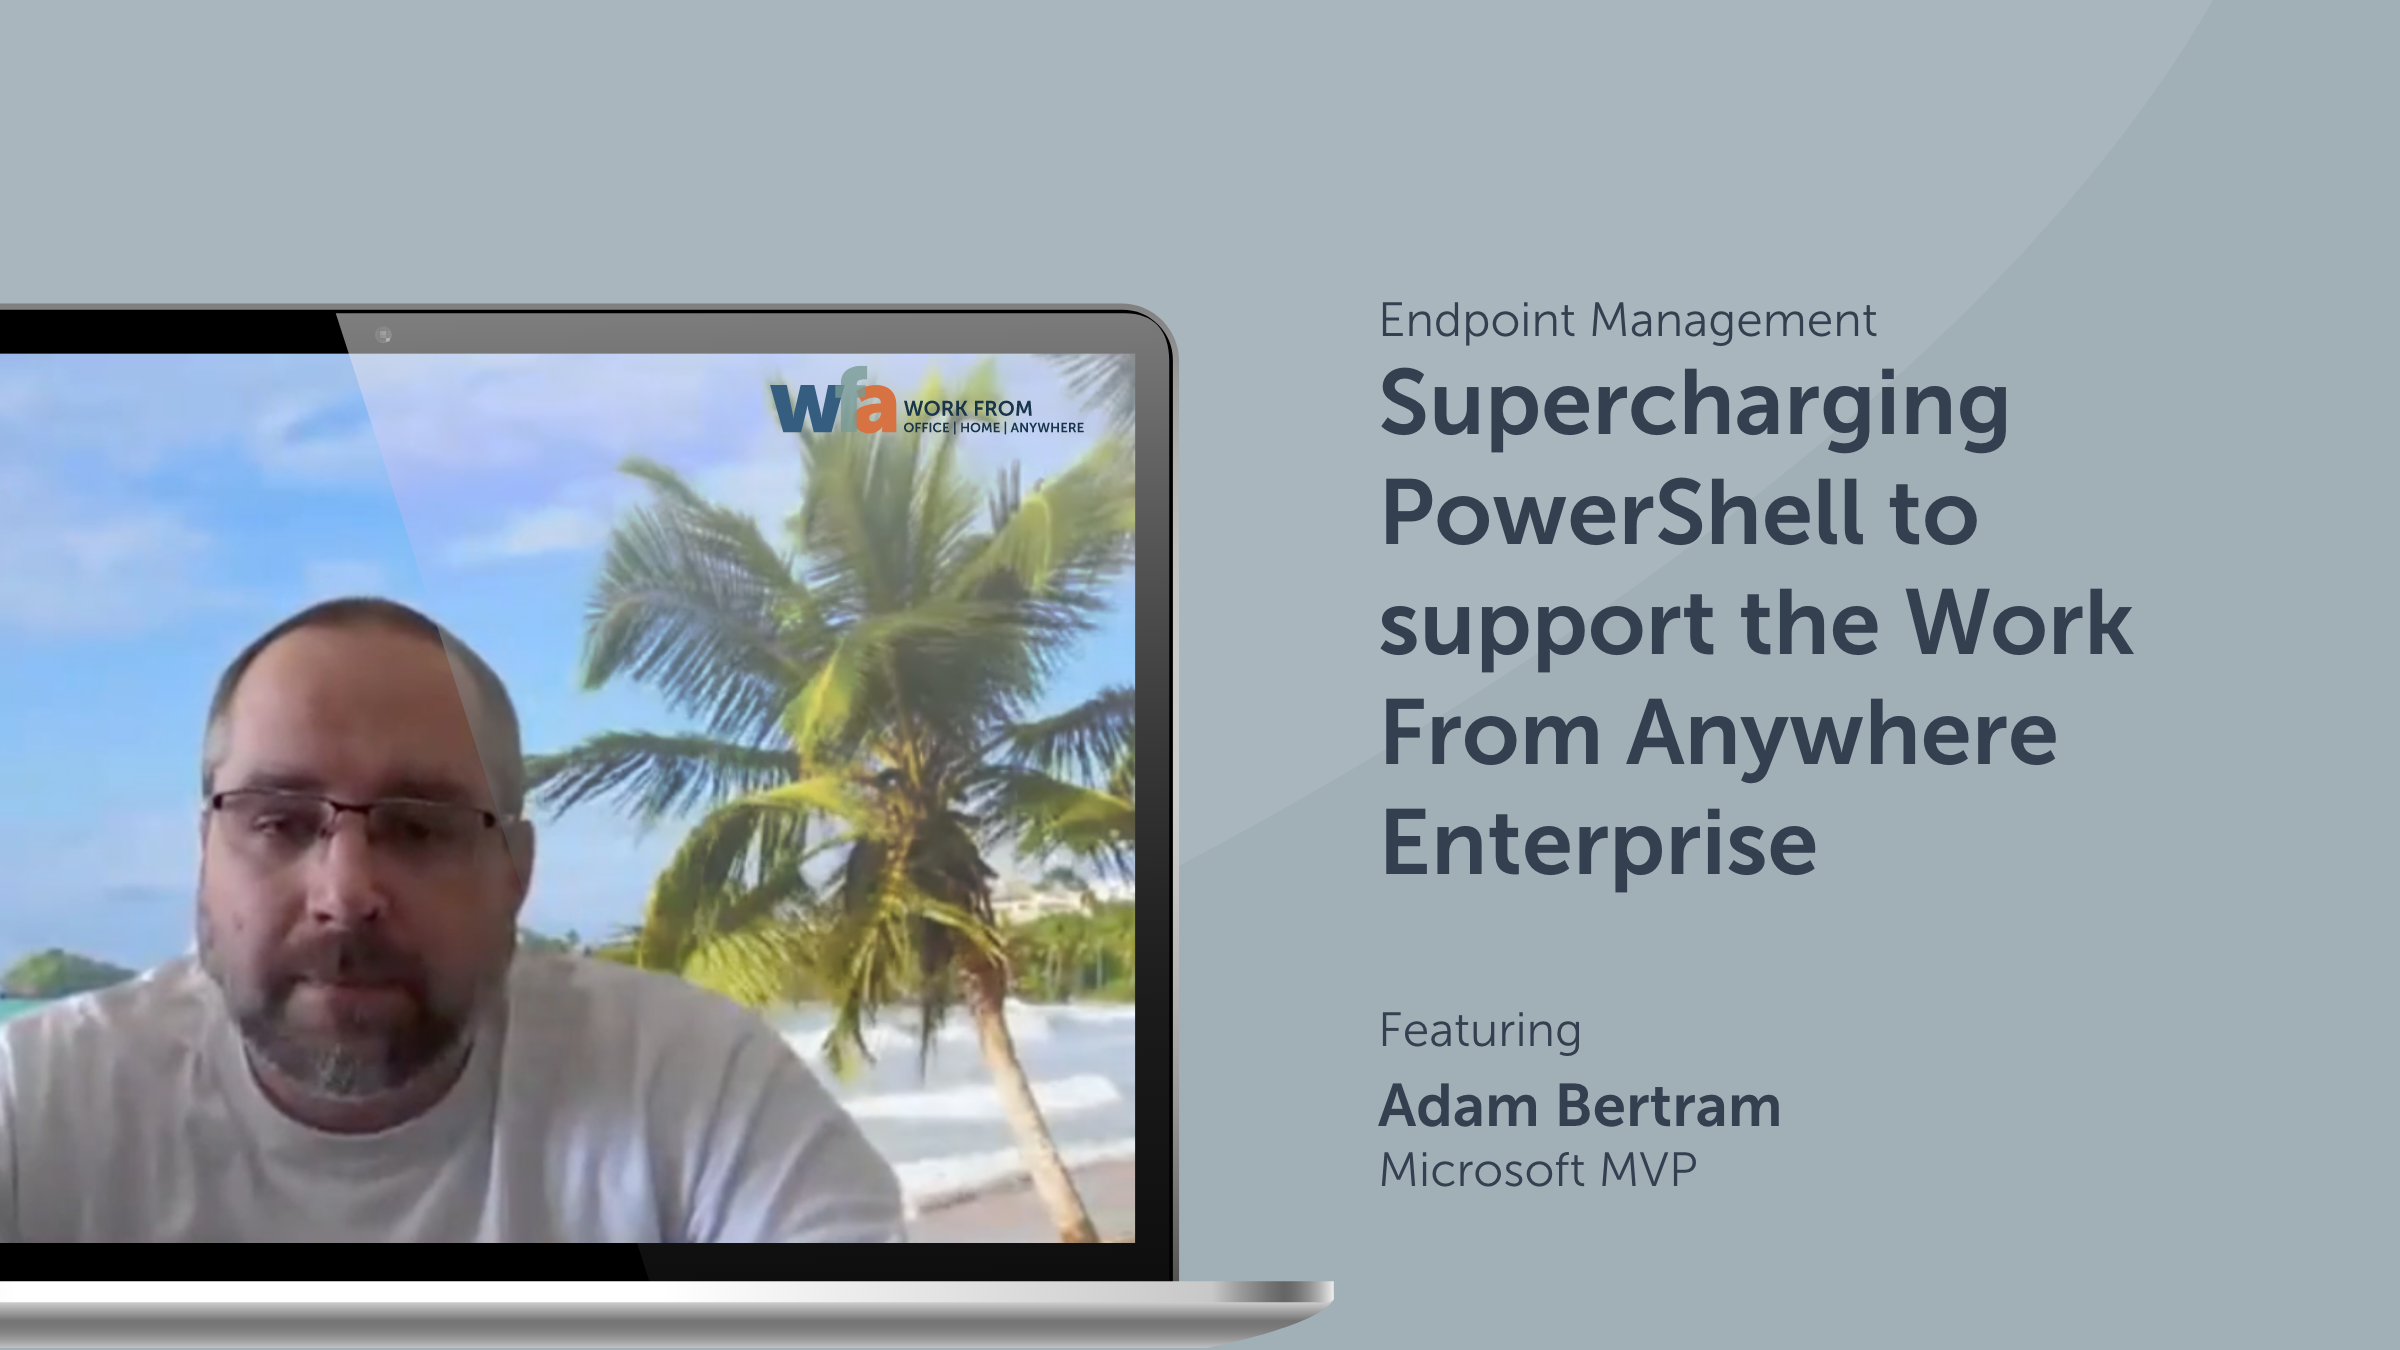 Supercharging PowerShell to support the Work From Anywhere Enterprise